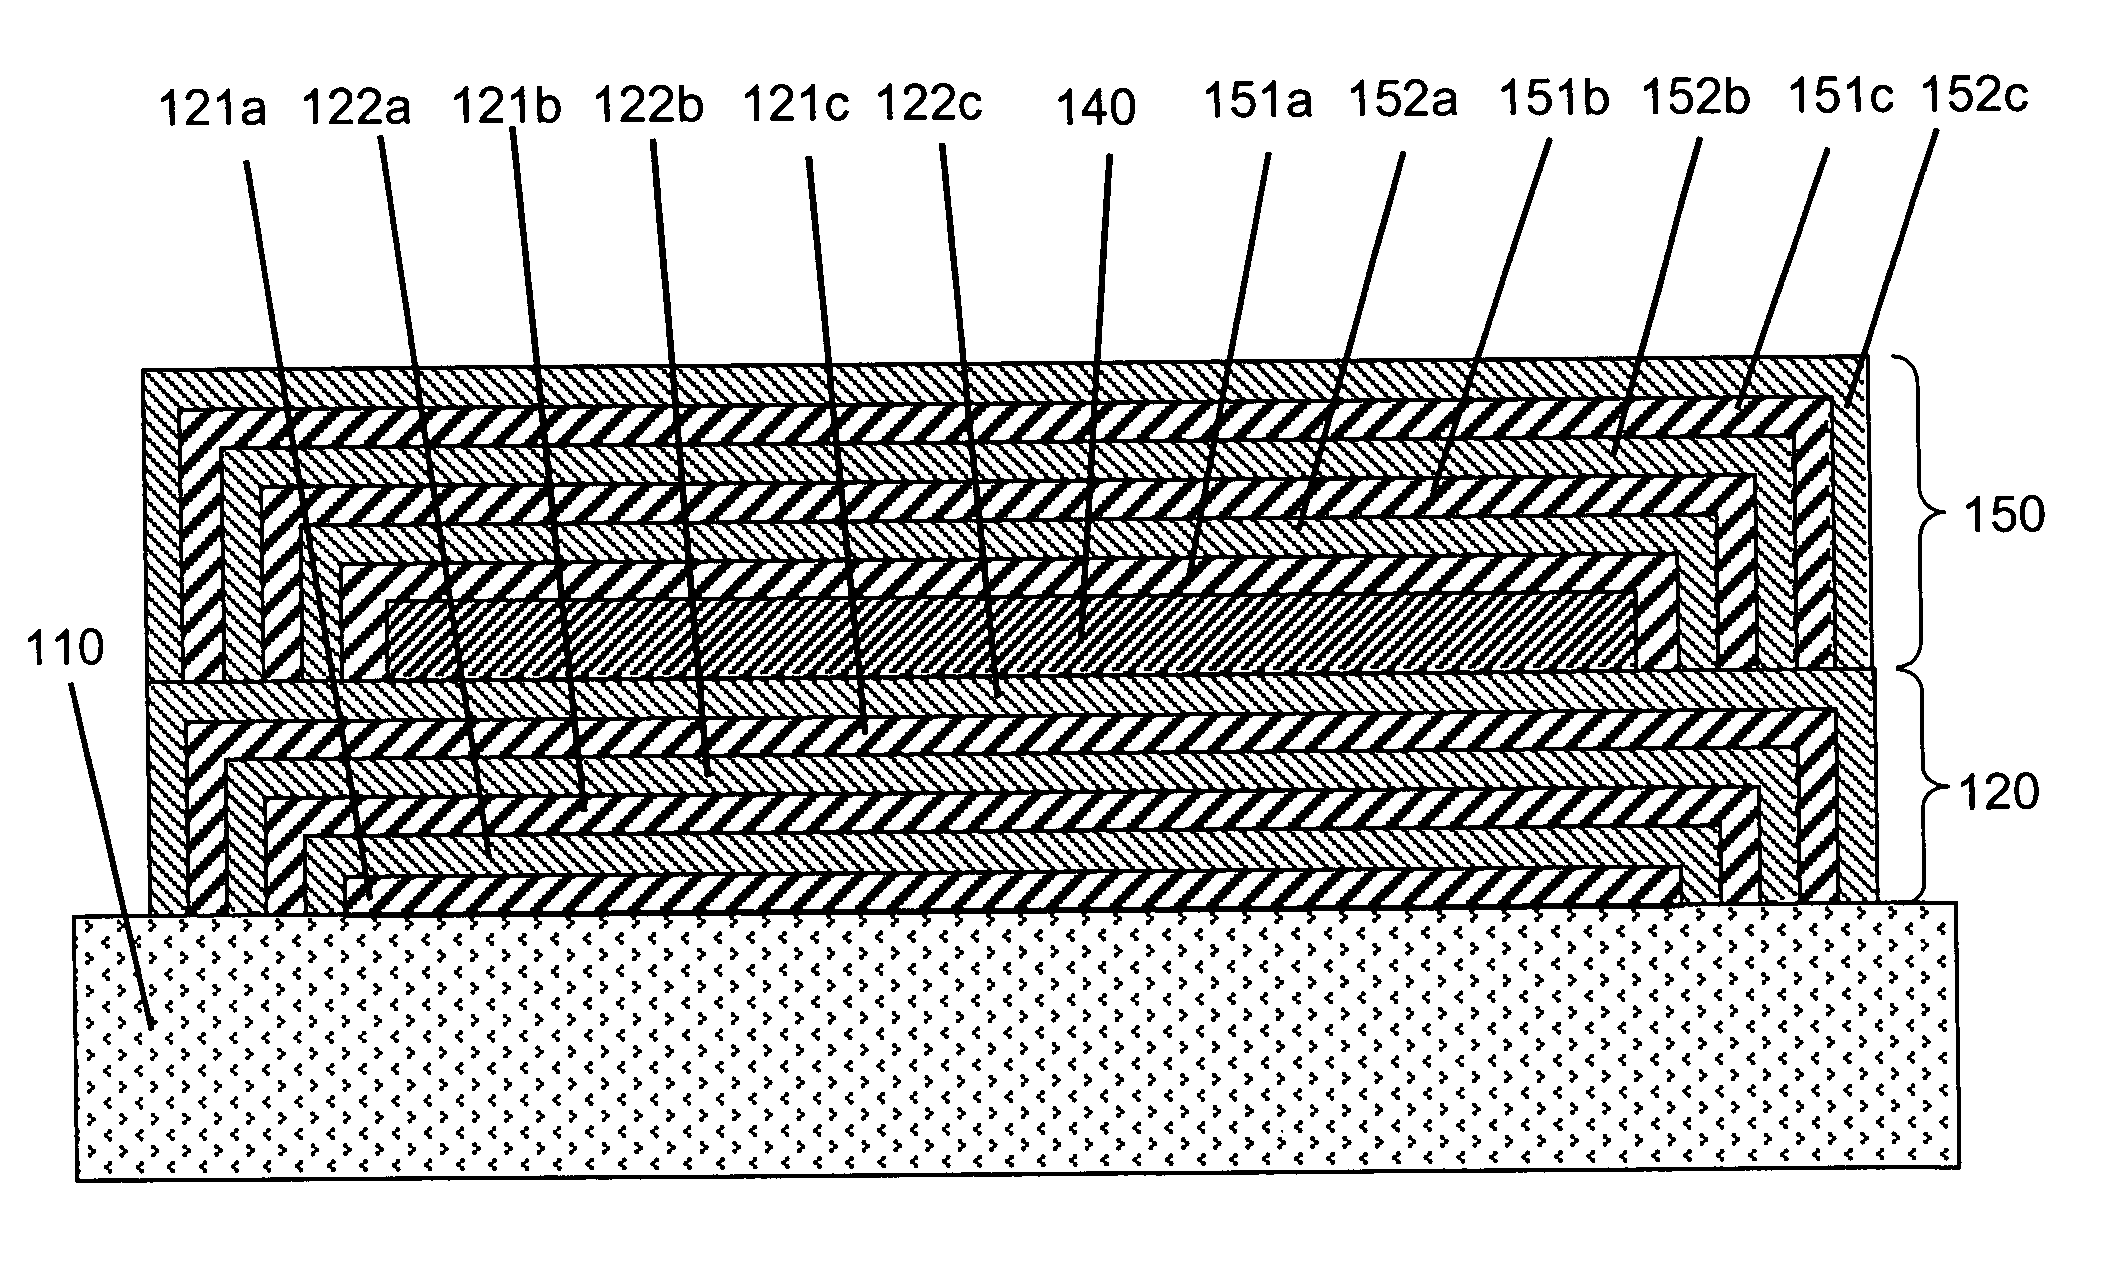 Methods and structures for reducing lateral diffusion through cooperative barrier layers